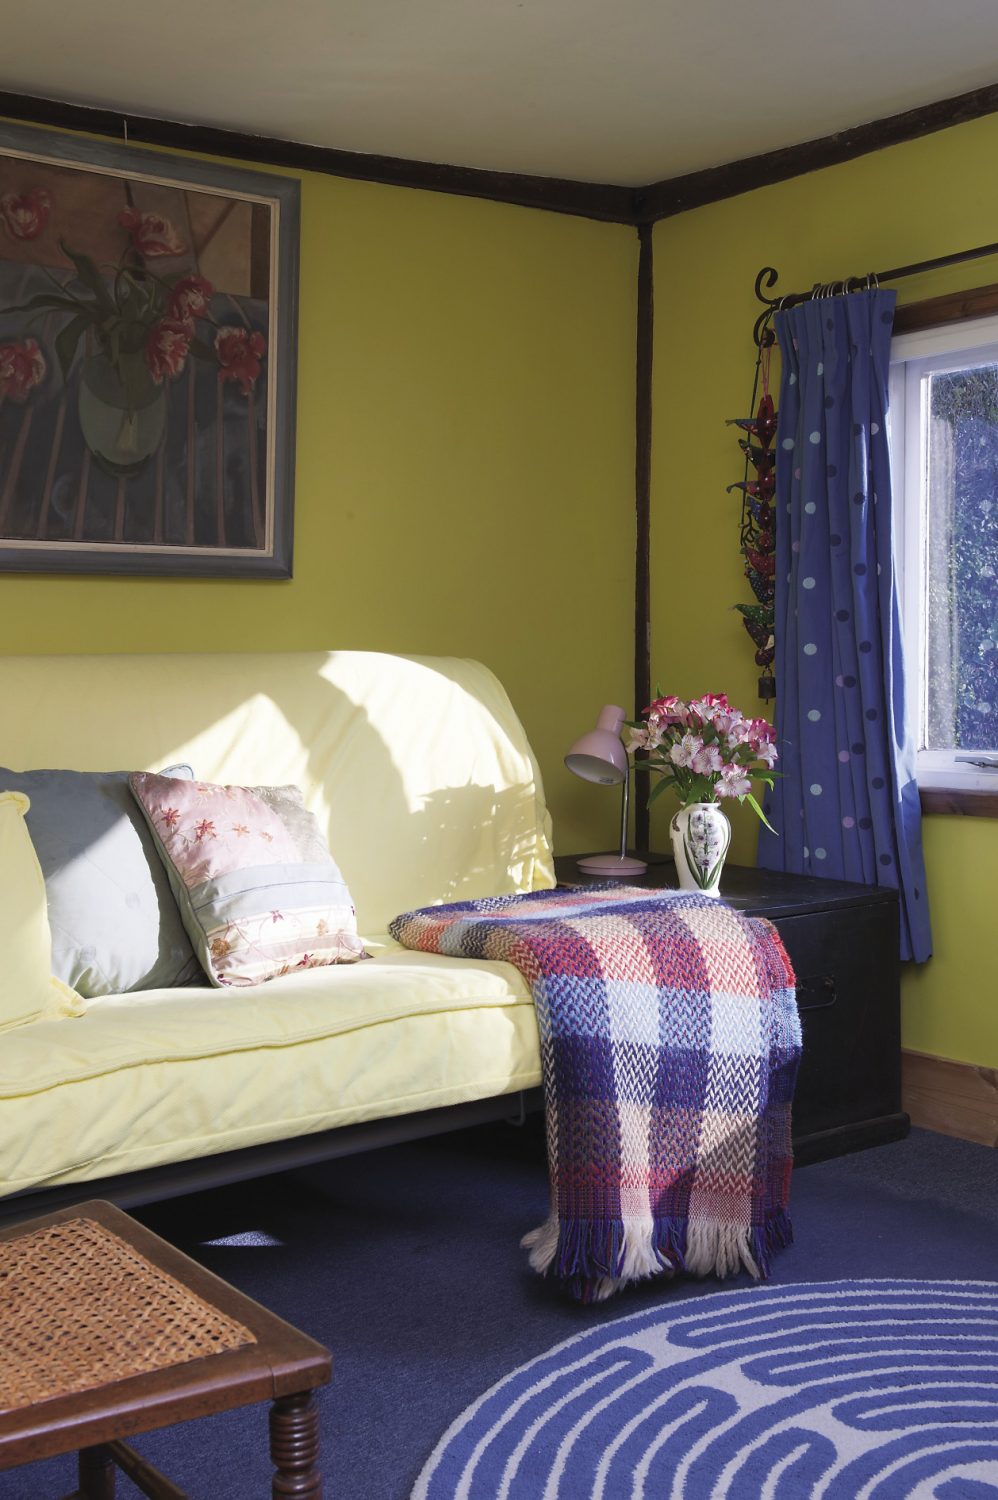 Light pours in through the window in the spare room, bringing its bright yellow walls to life